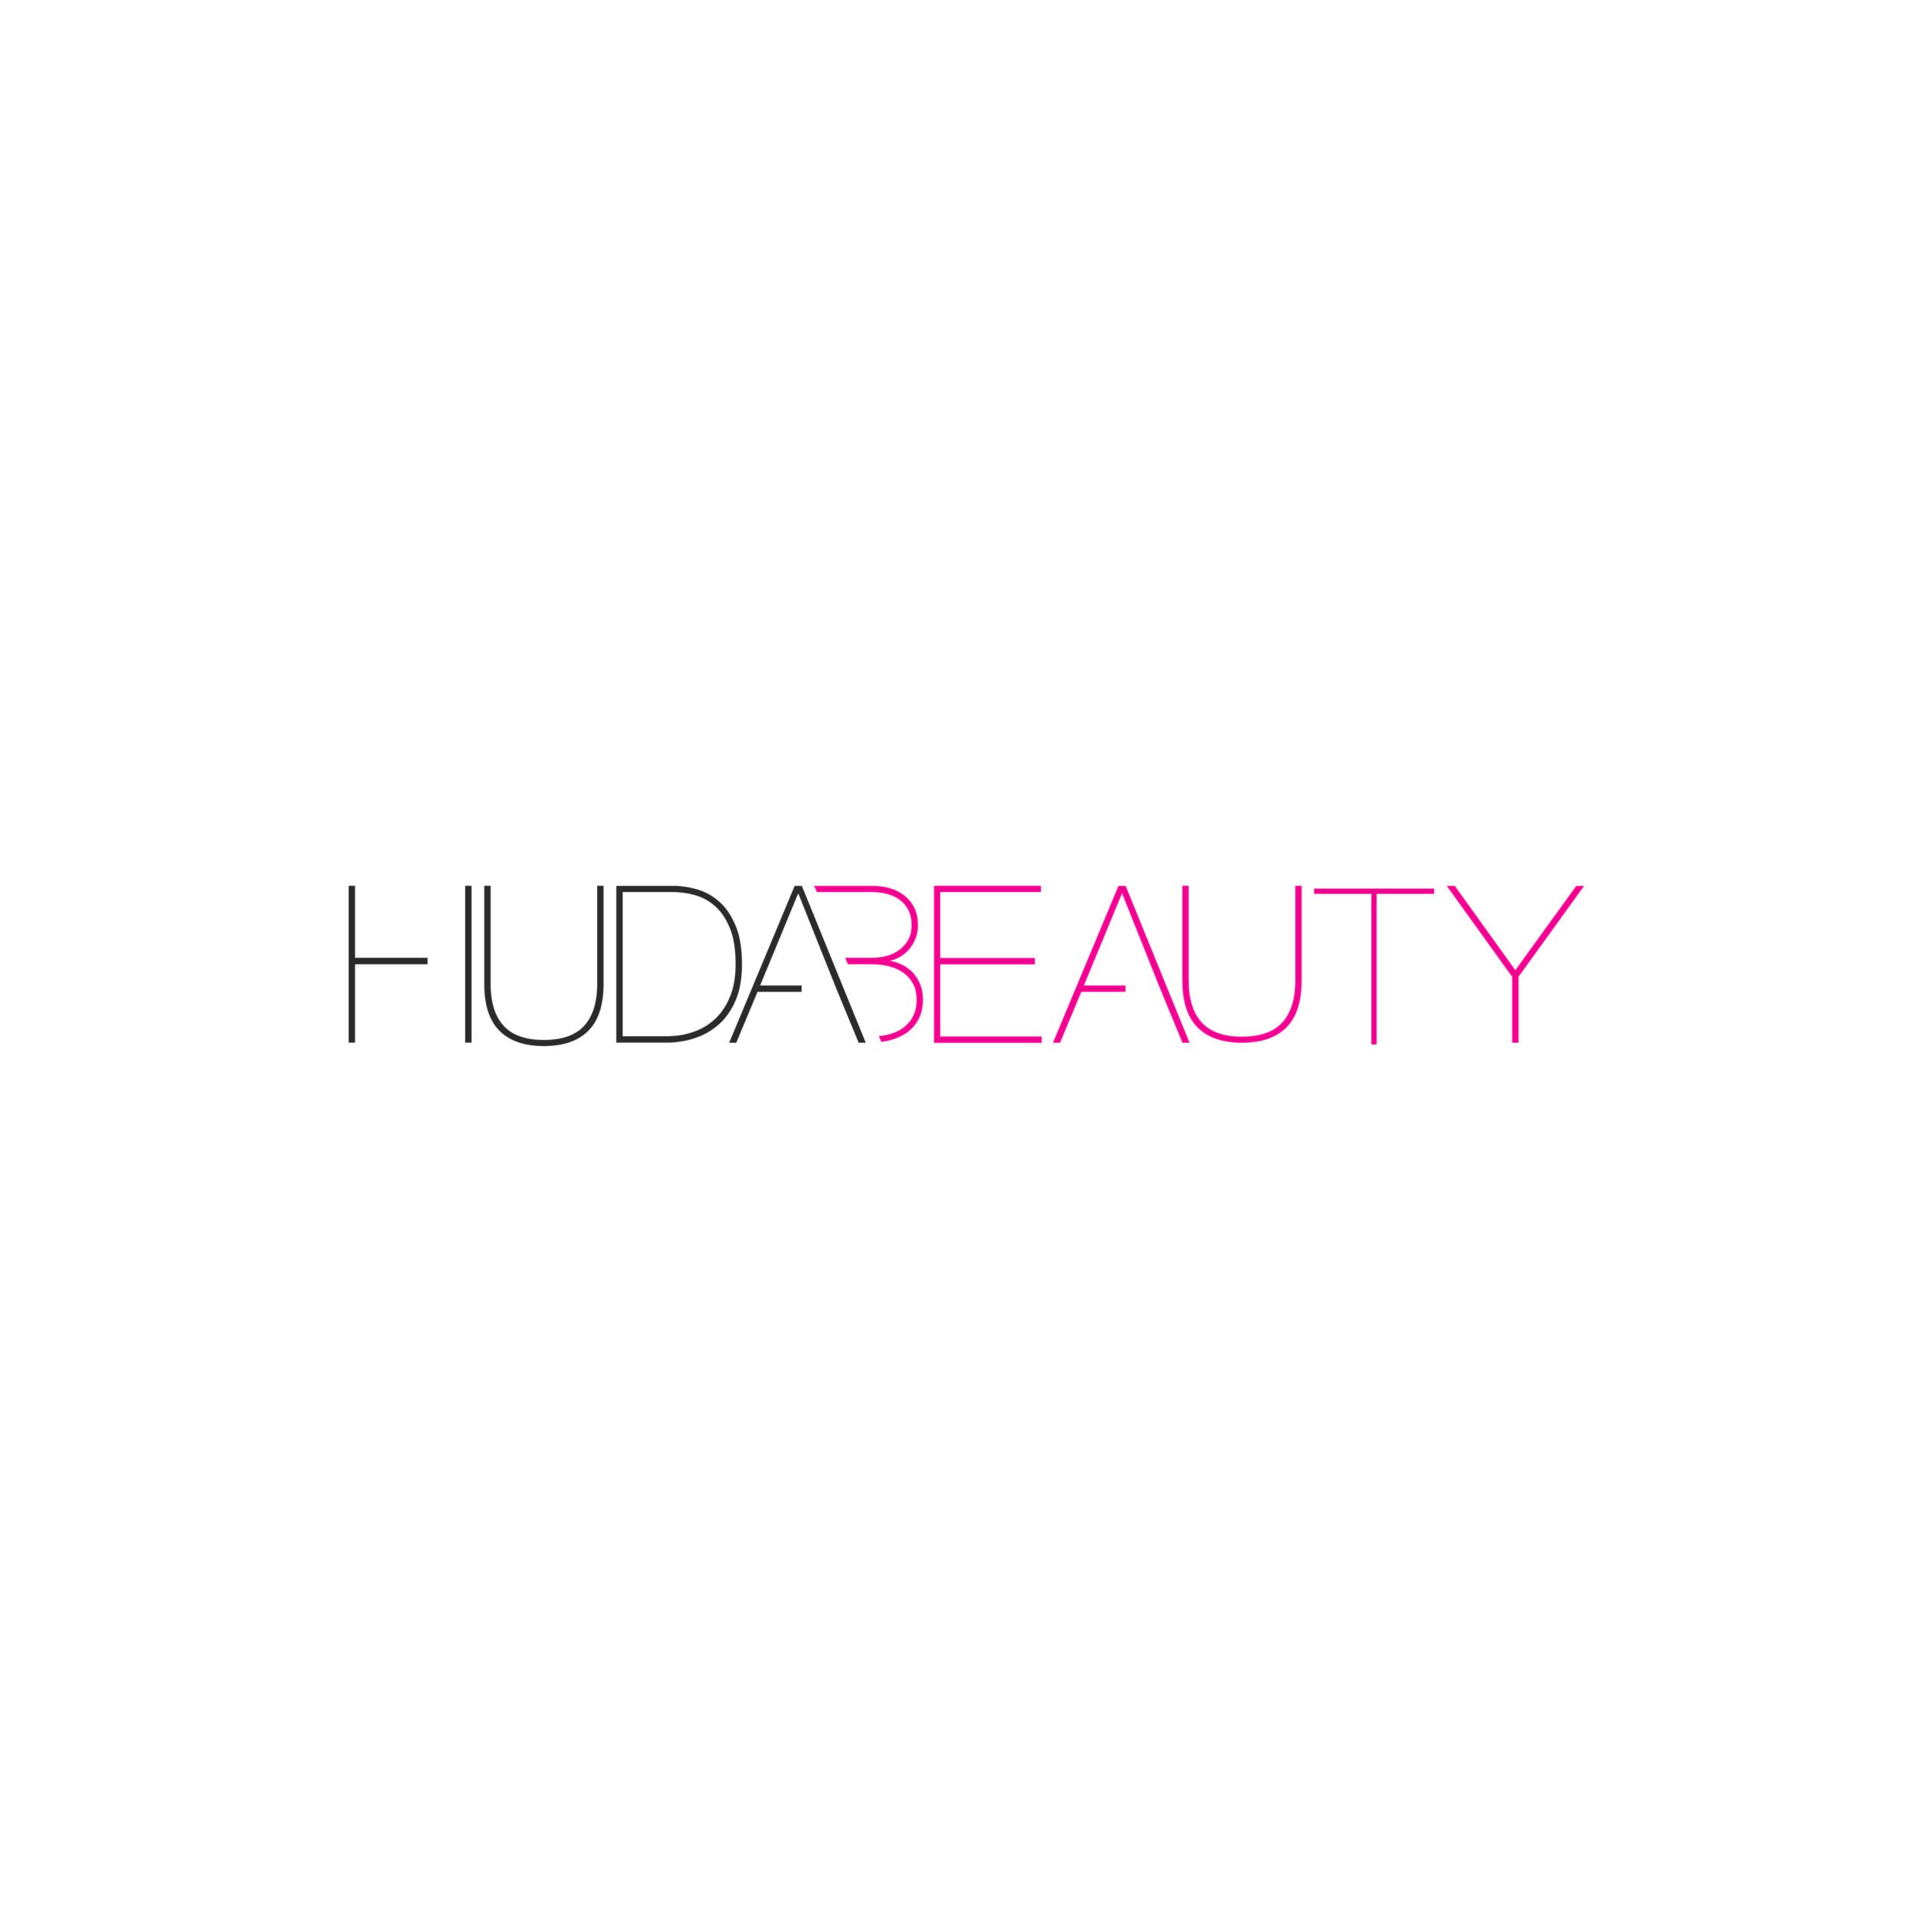 Beauty and cosmetics Logo PNG Vector (EPS) Free Download